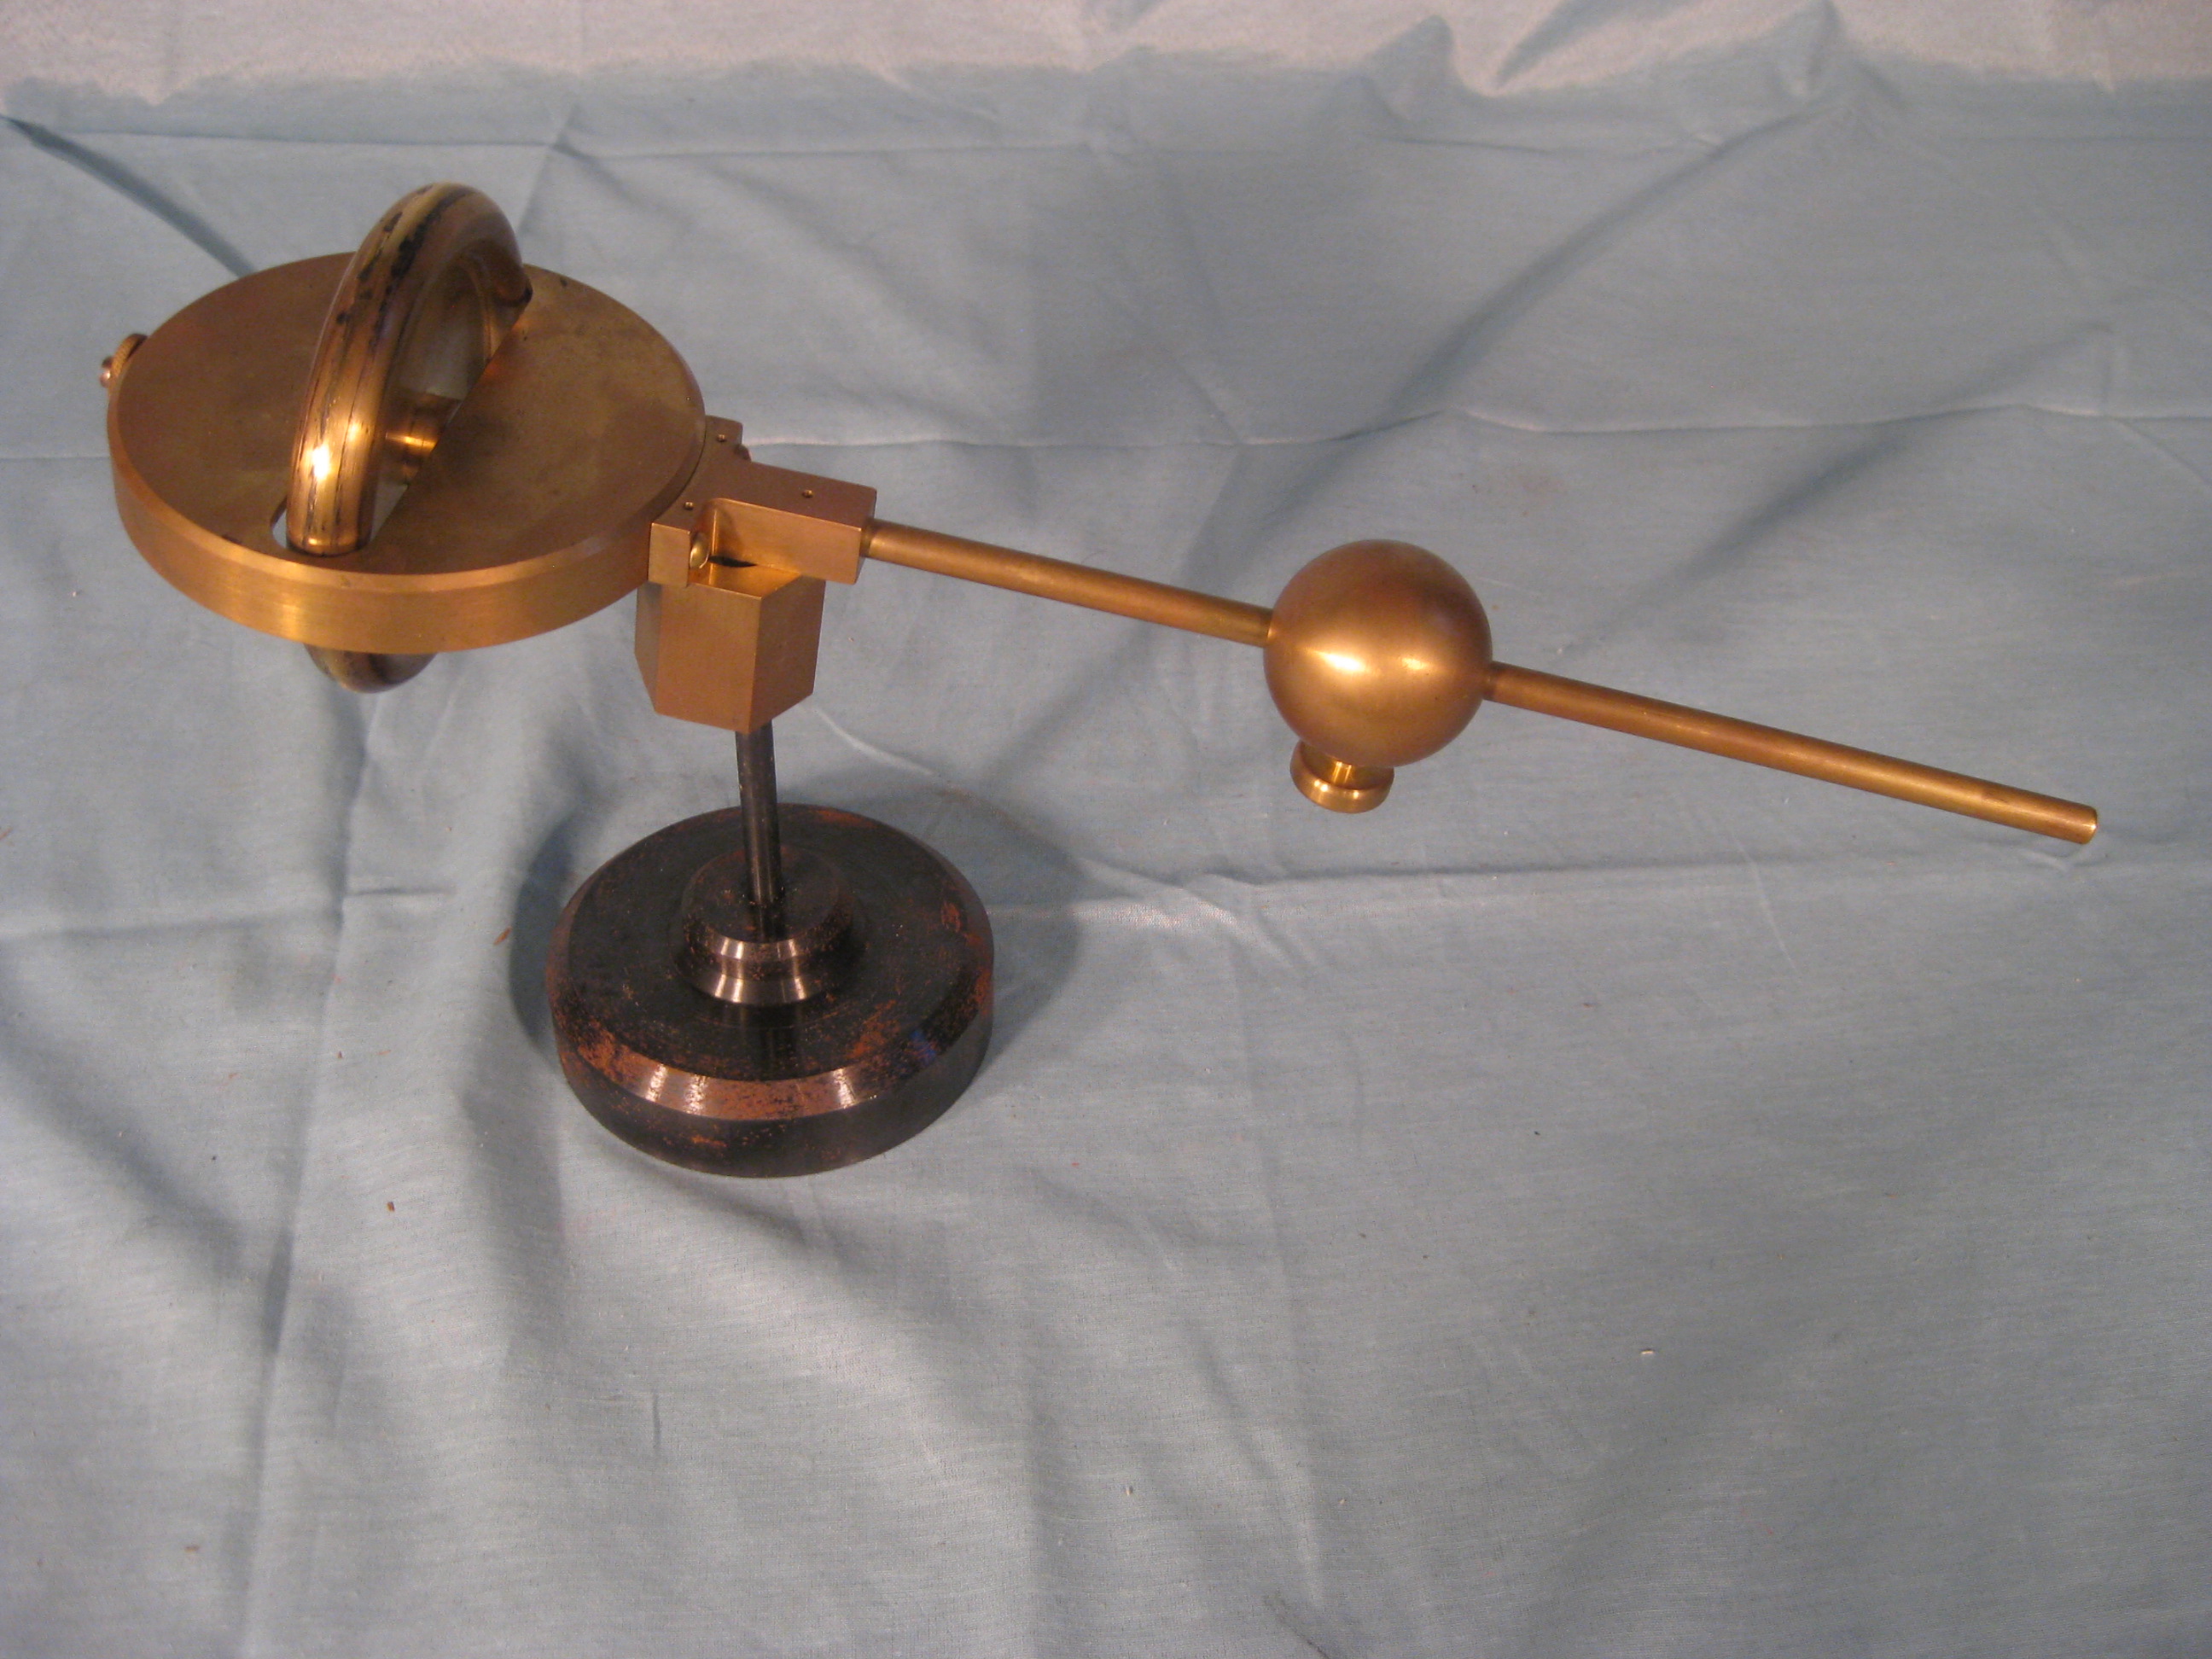 Gyroscope with counter weight.